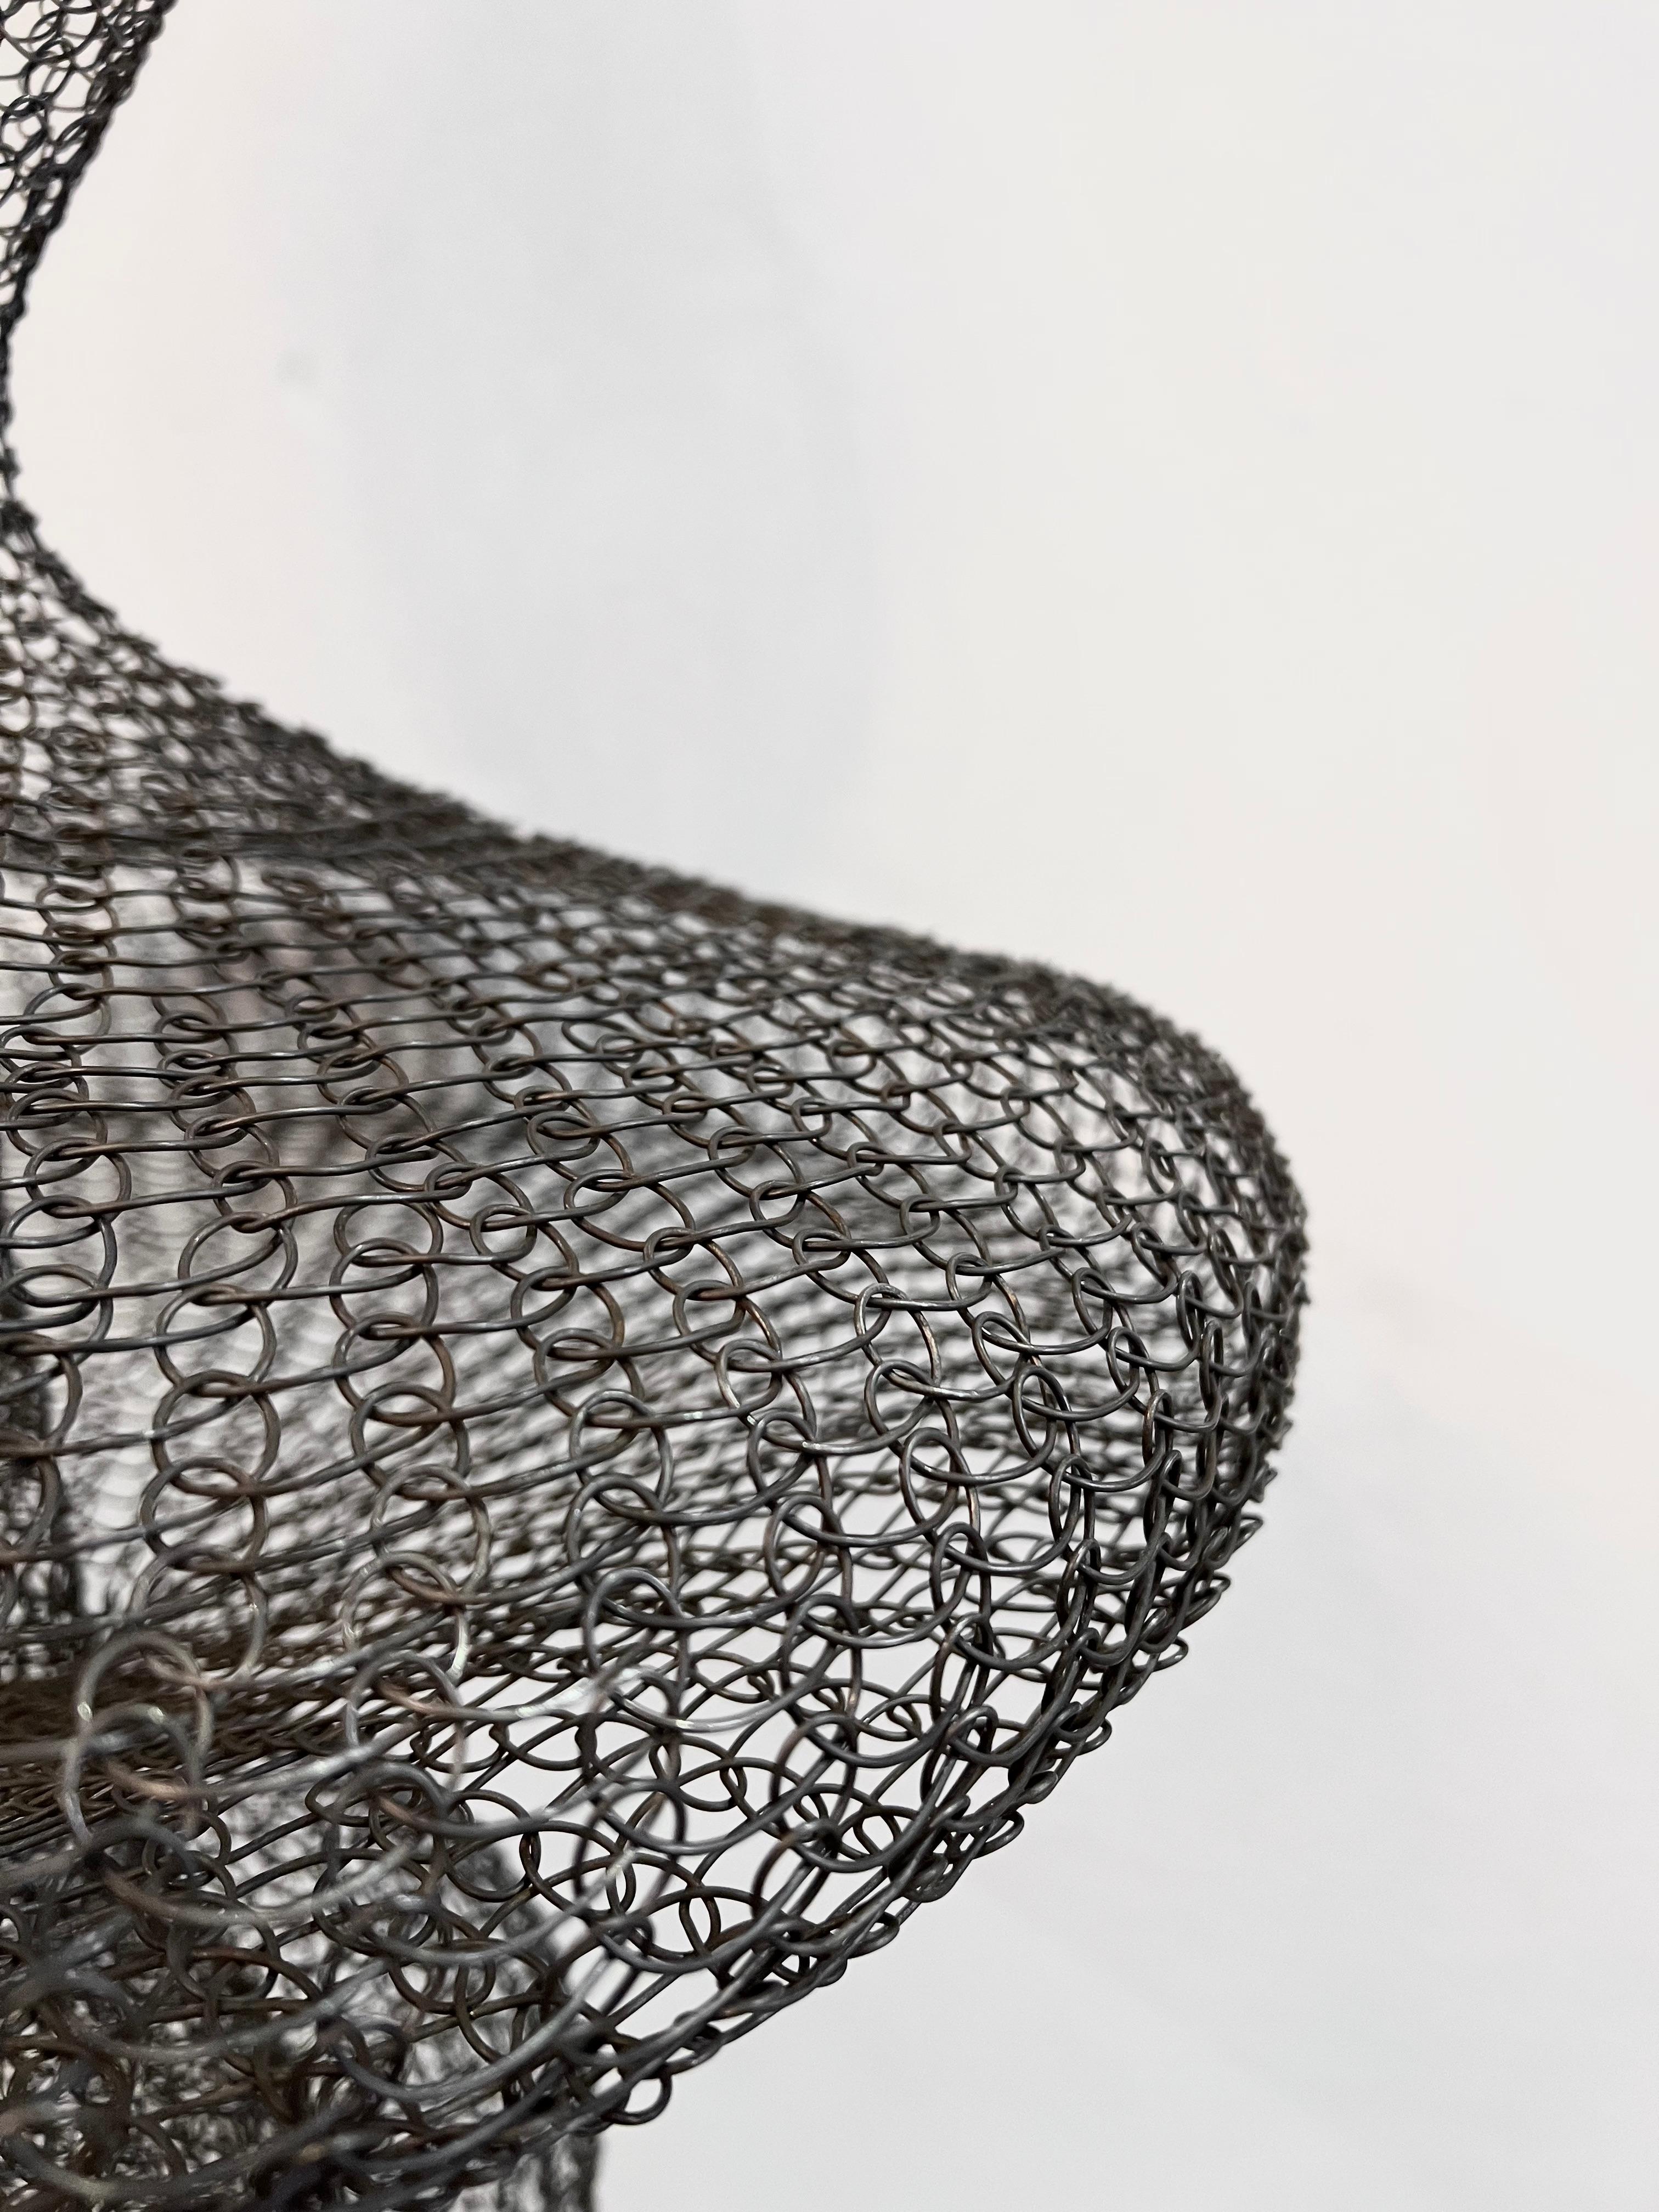 Organic Woven Mesh Wire Sculpture by Ulrikk Dufosse For Sale 1